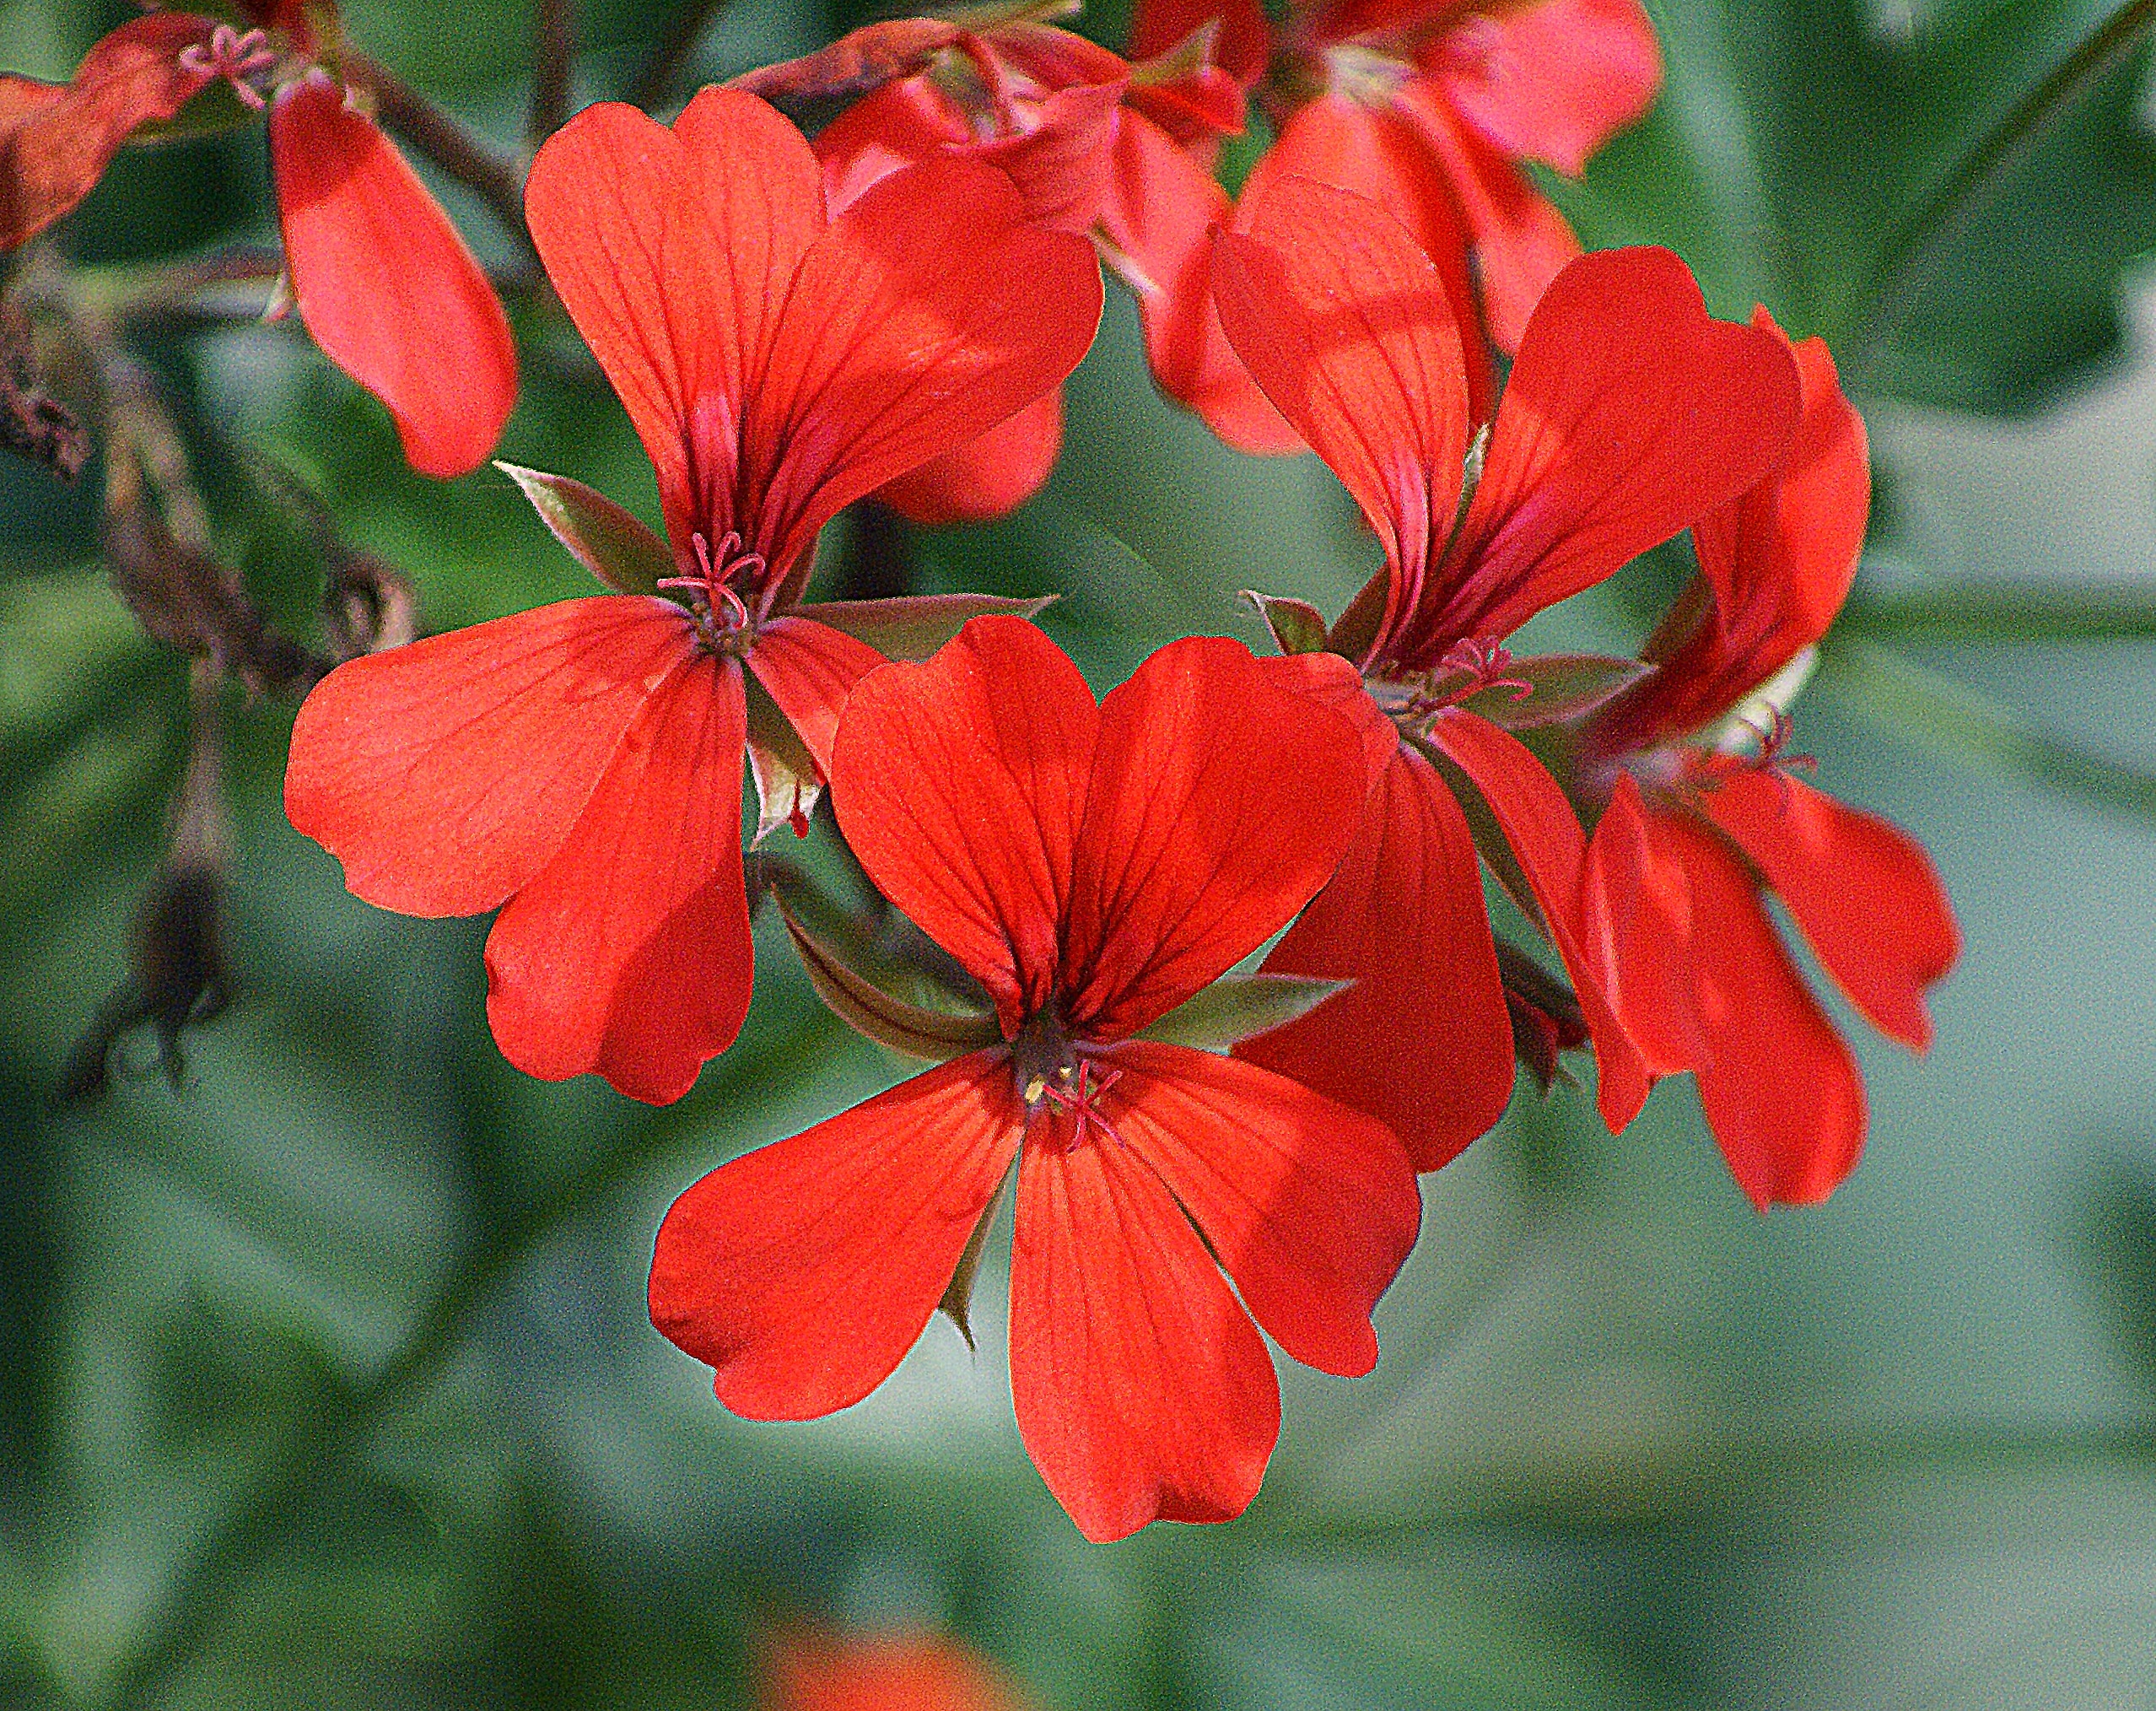 red 5 petaled flowers closeup photography at daytime